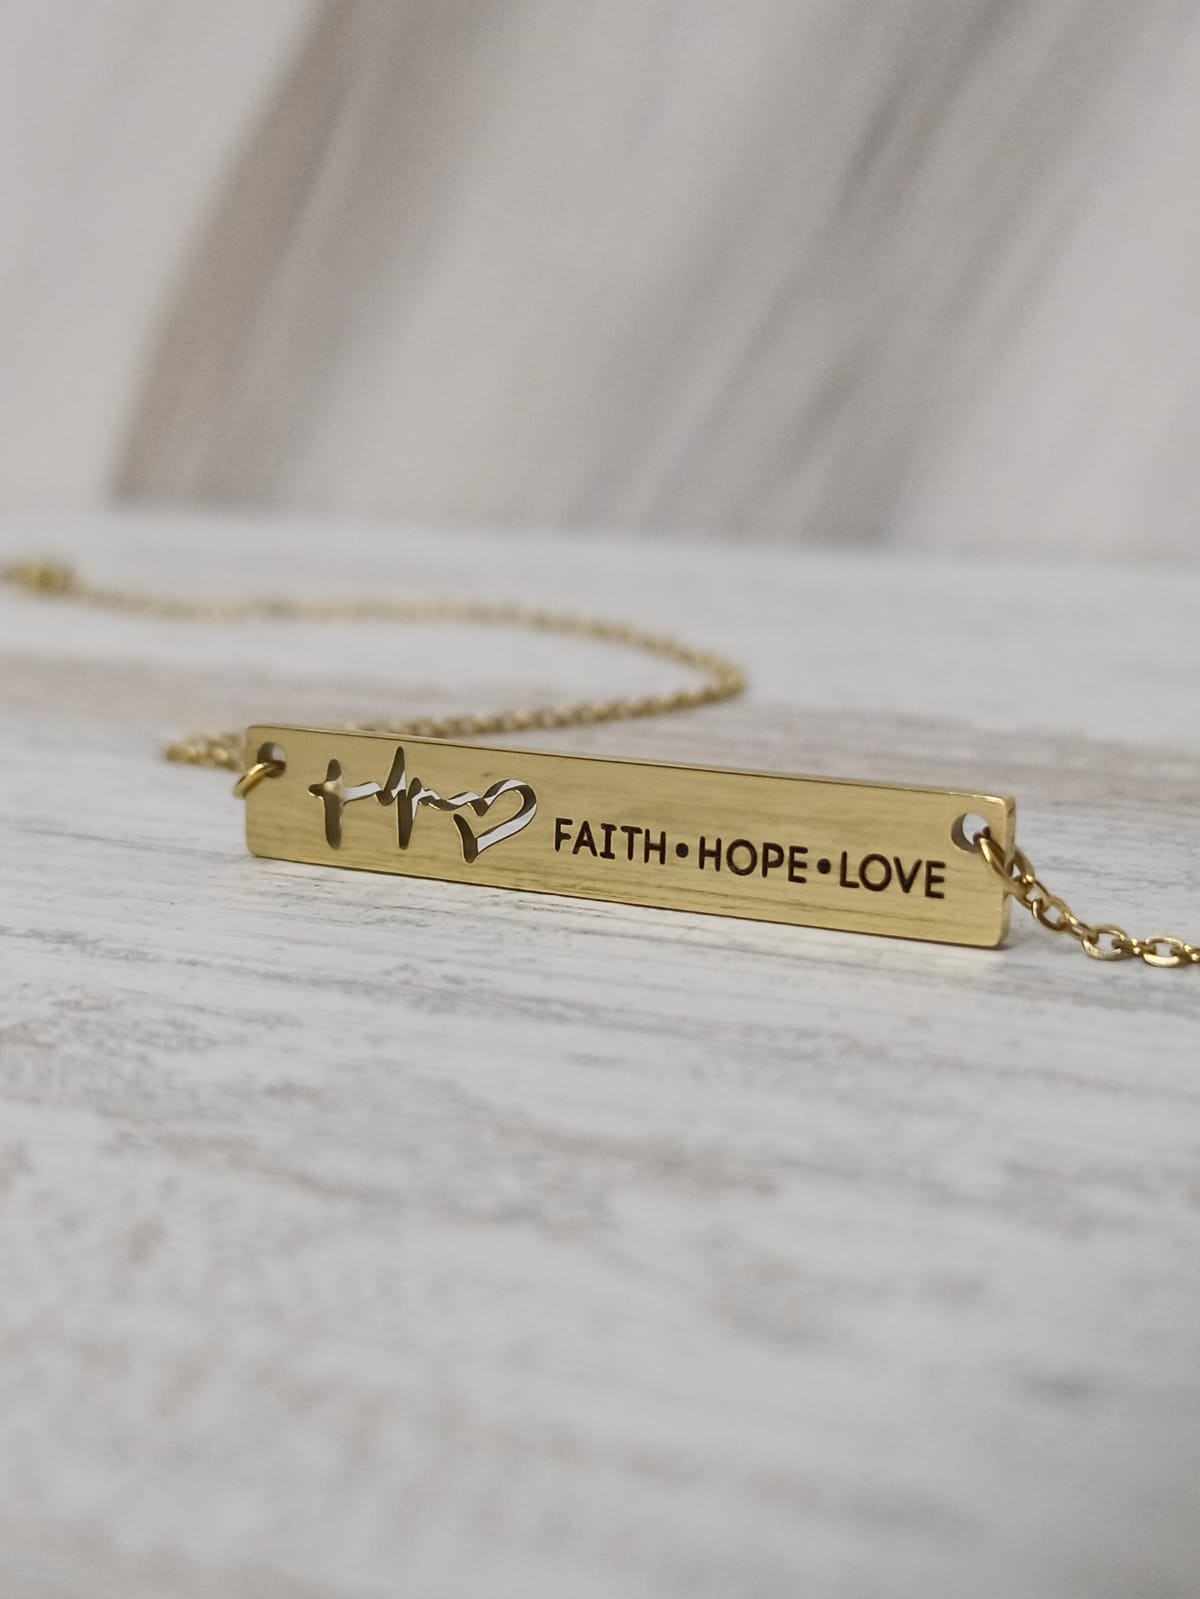 Love Hope Faith Necklace Love Necklace Hope Necklace Heart Necklace Anchor  Necklace Cross Necklace Inspirational Gift Charm Necklace Pendant - Etsy